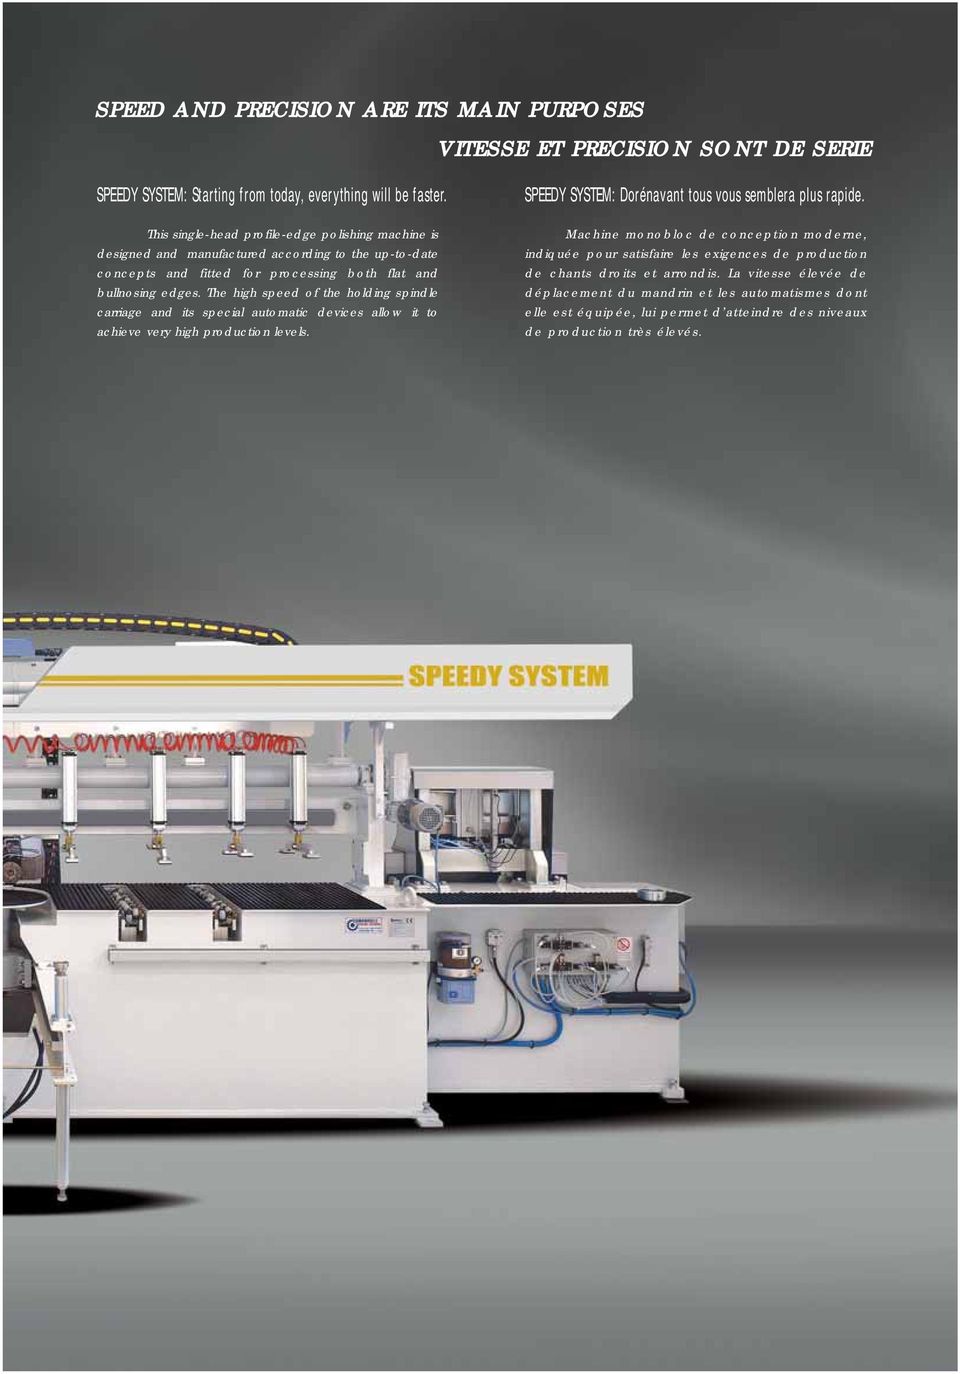 The high speed of the holding spindle carriage and its special automatic devices allow it to achieve very high production levels. SPEEDY SYSTEM: Dorénavant tous vous semblera plus rapide.